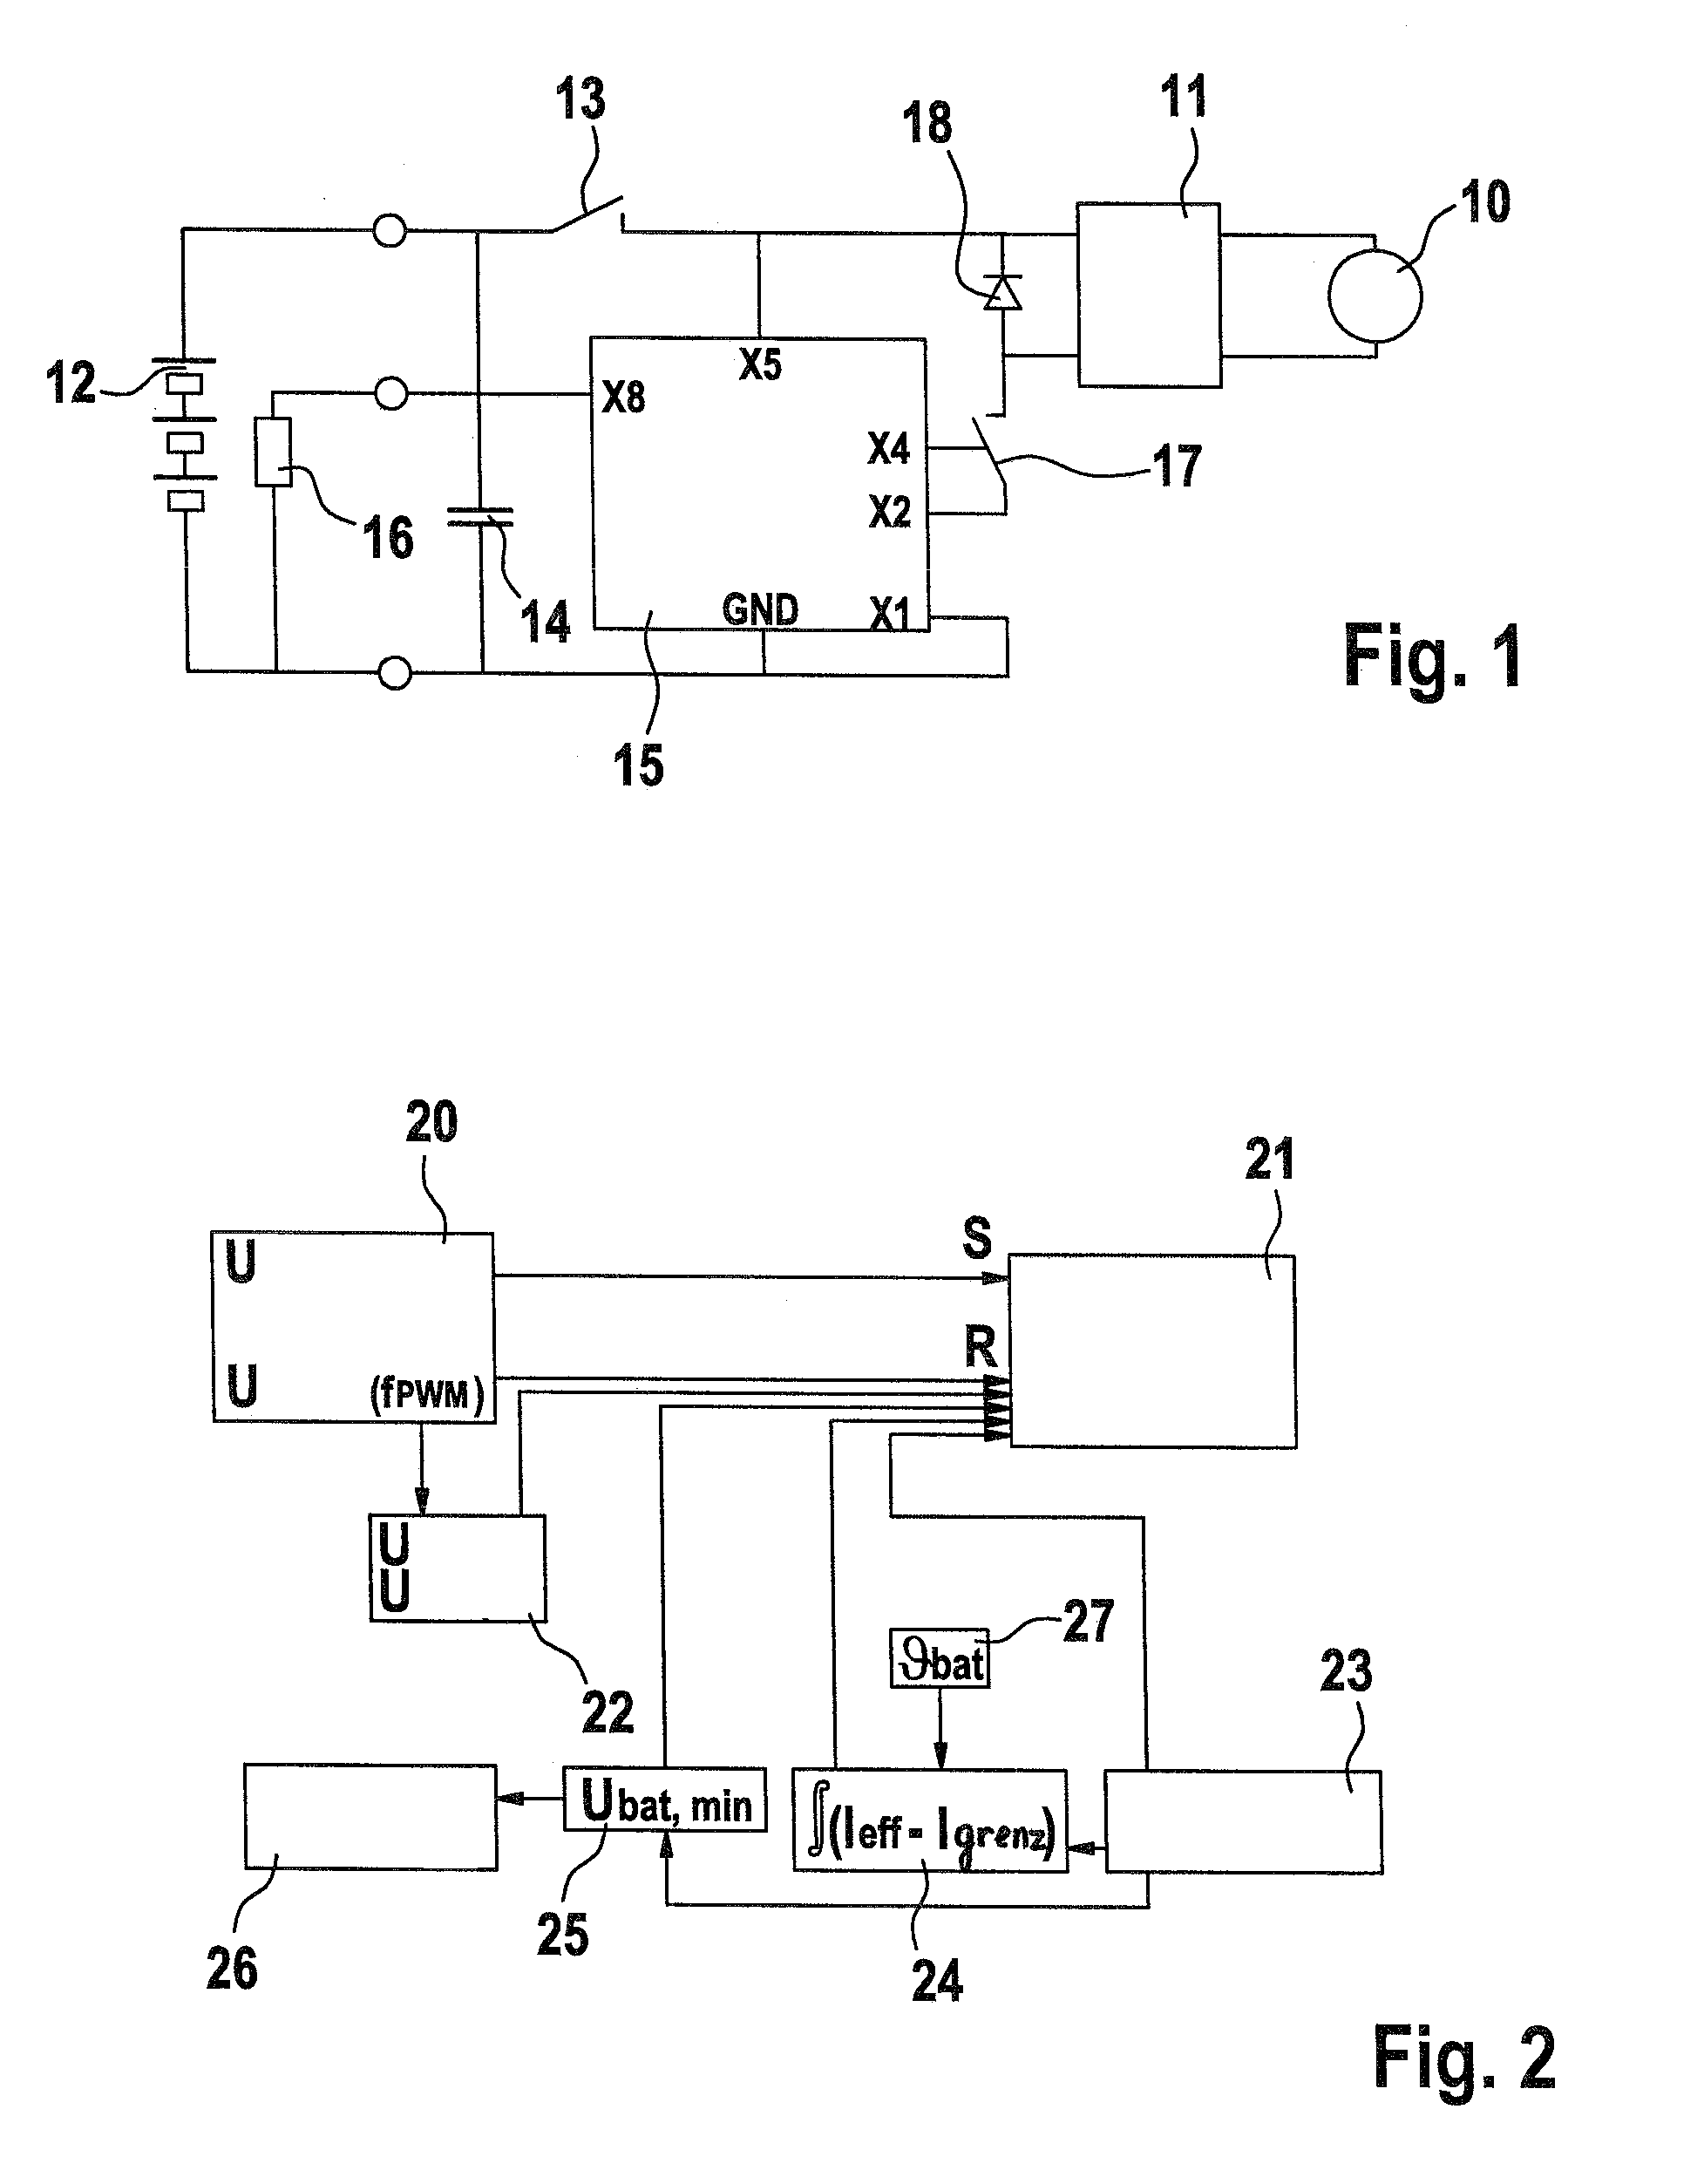 Method for operating a power tool